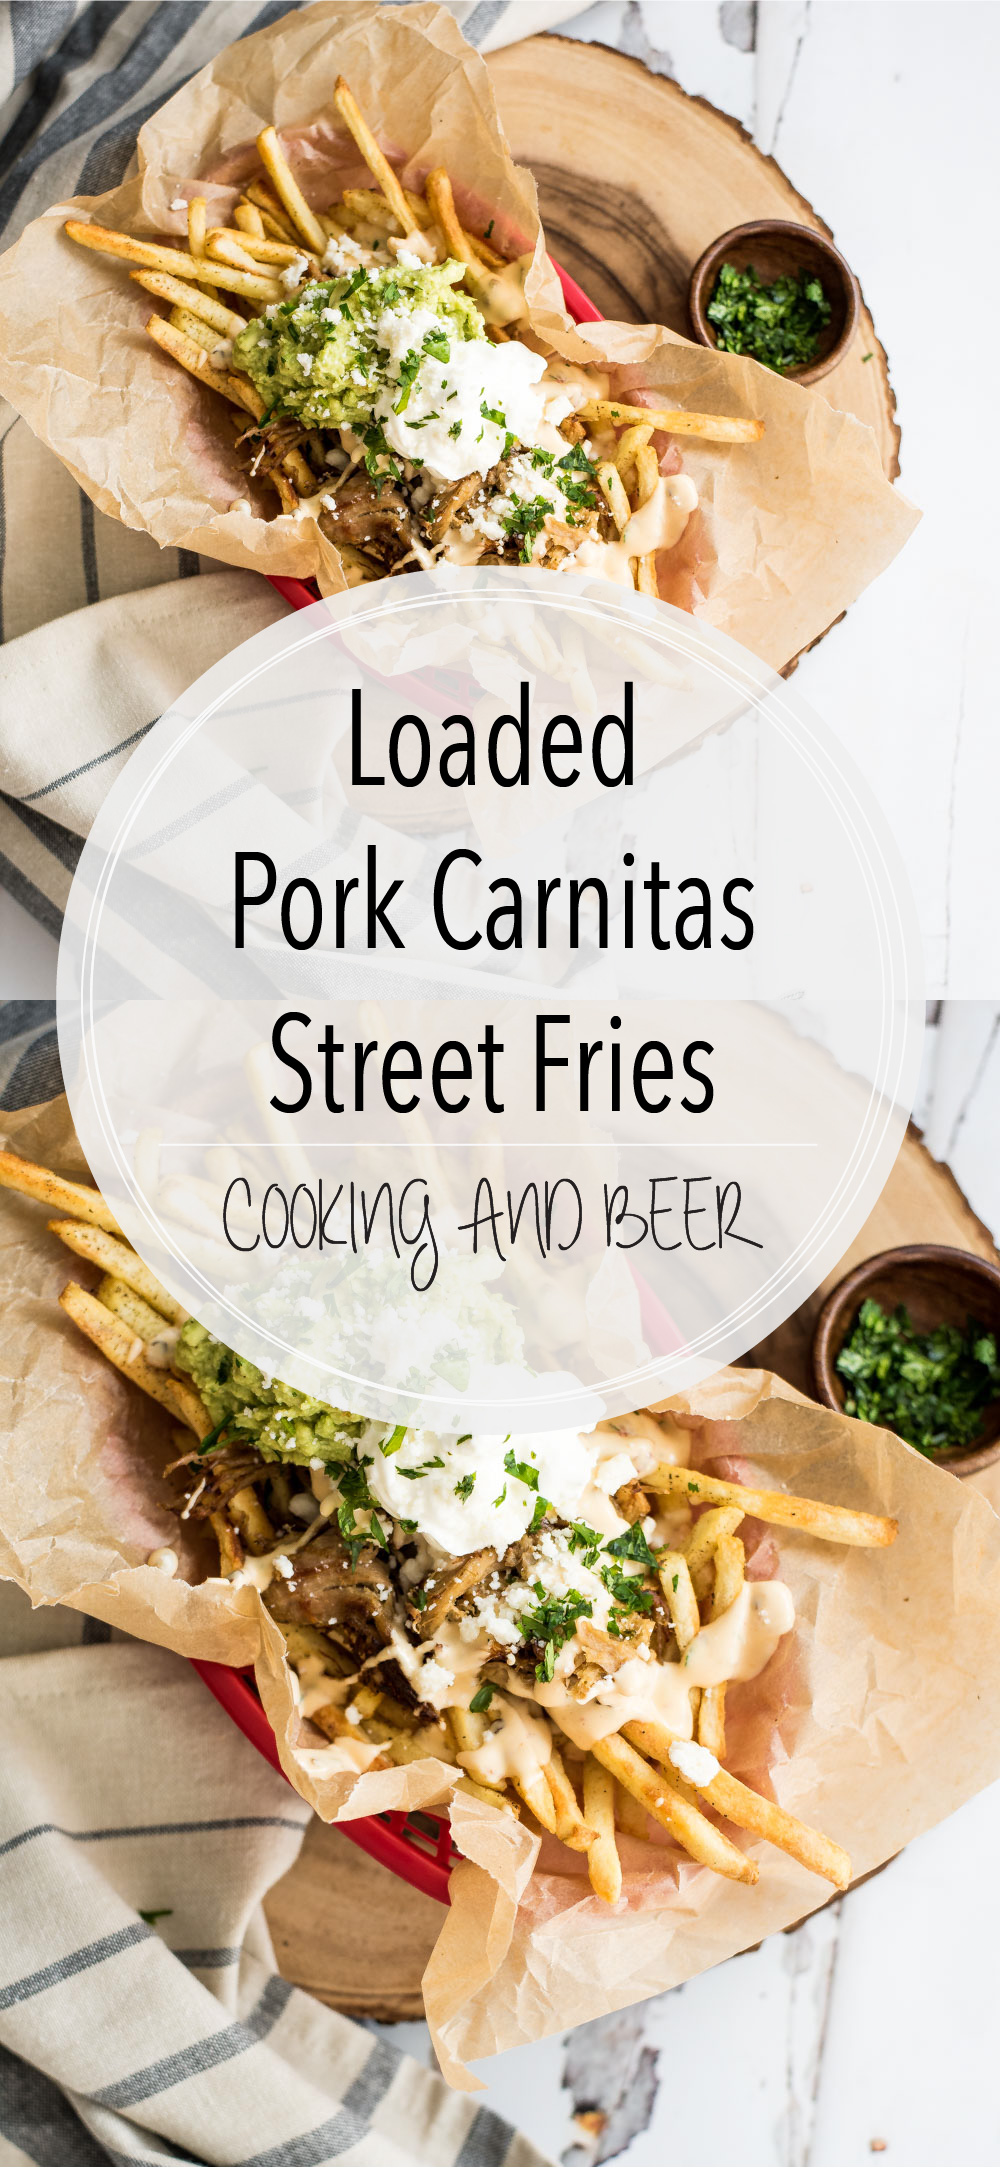 These loaded pork carnitas street fries are the perfect side dish for a Mexican-themed dinner or an appetizer for a small get together!